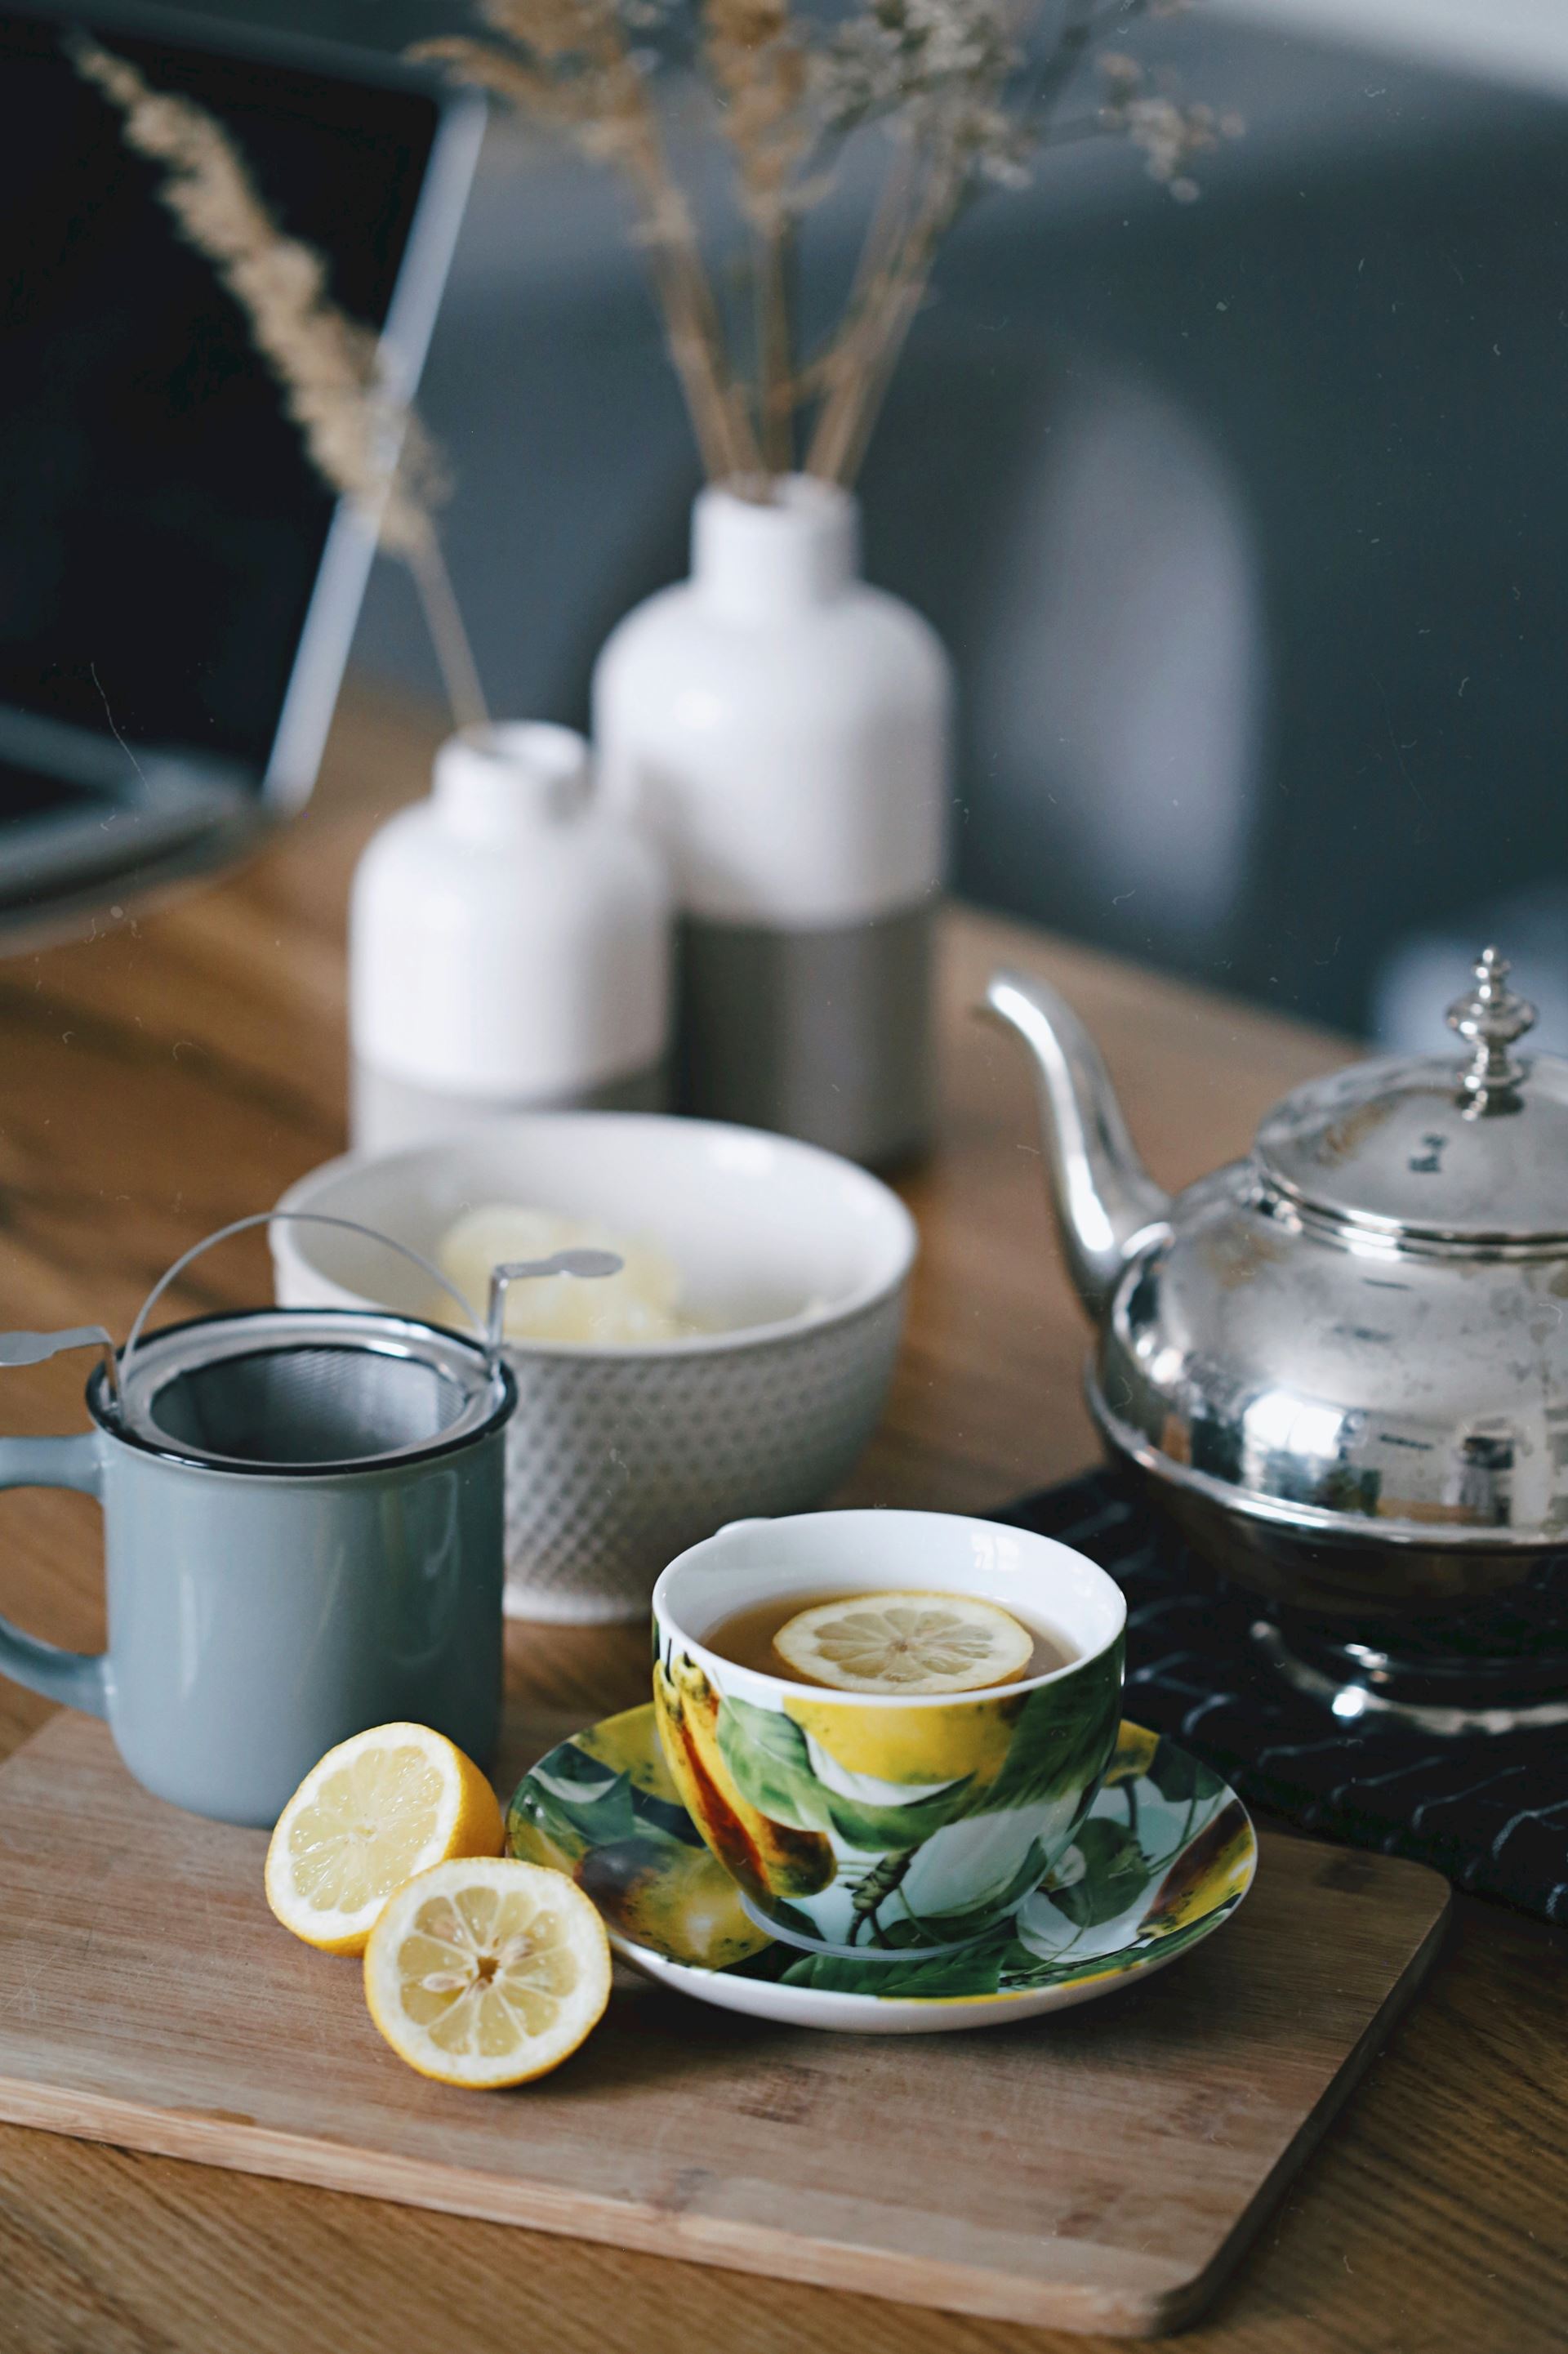 a pot of tea, a filled cup and a plate of lemon slices on a table